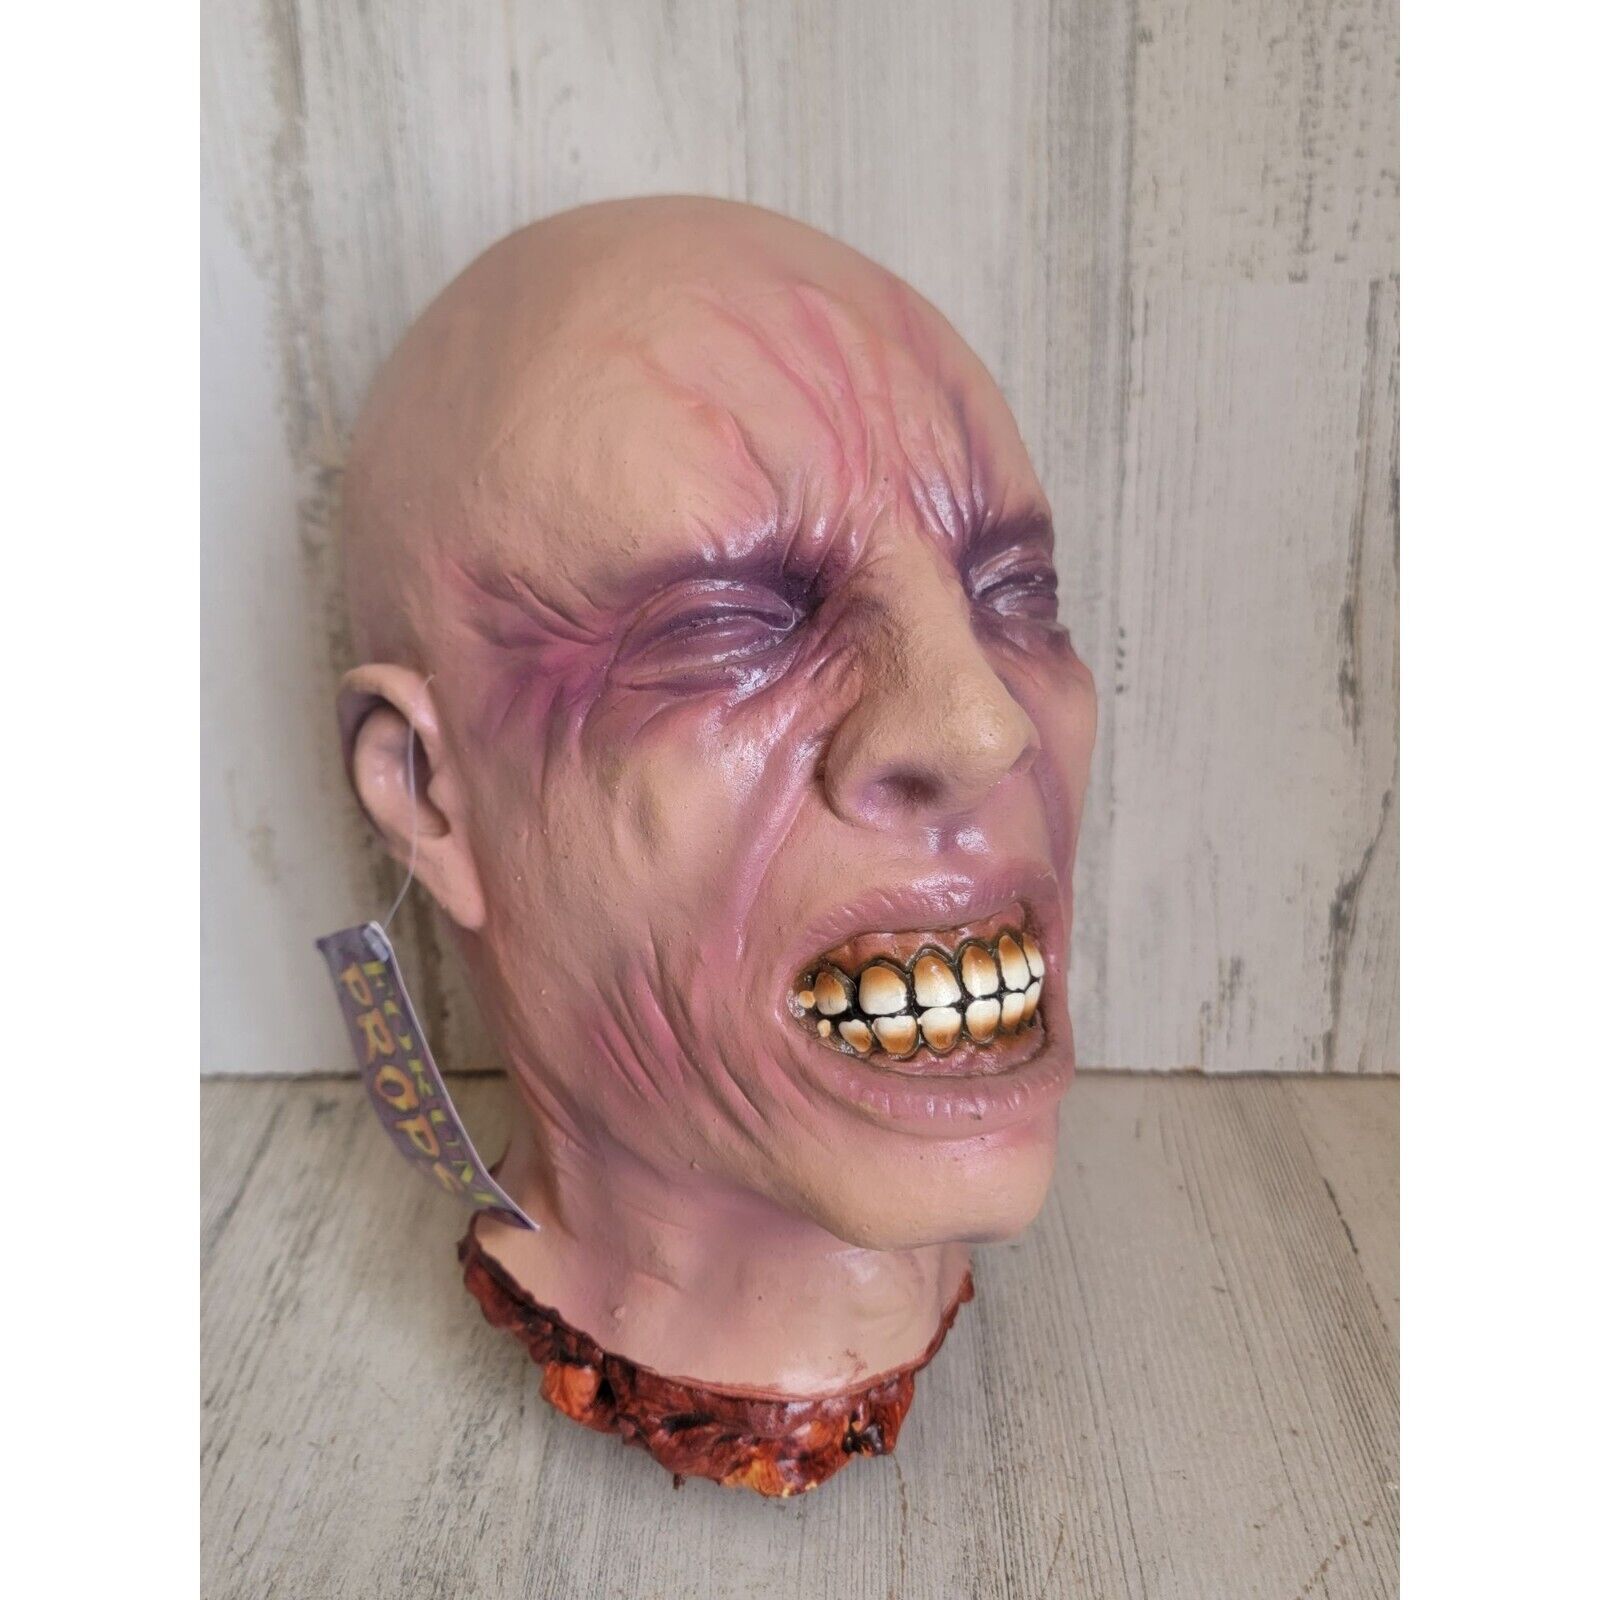 Vintage Forum props zombie pain teeth decapitated head scary Halloween